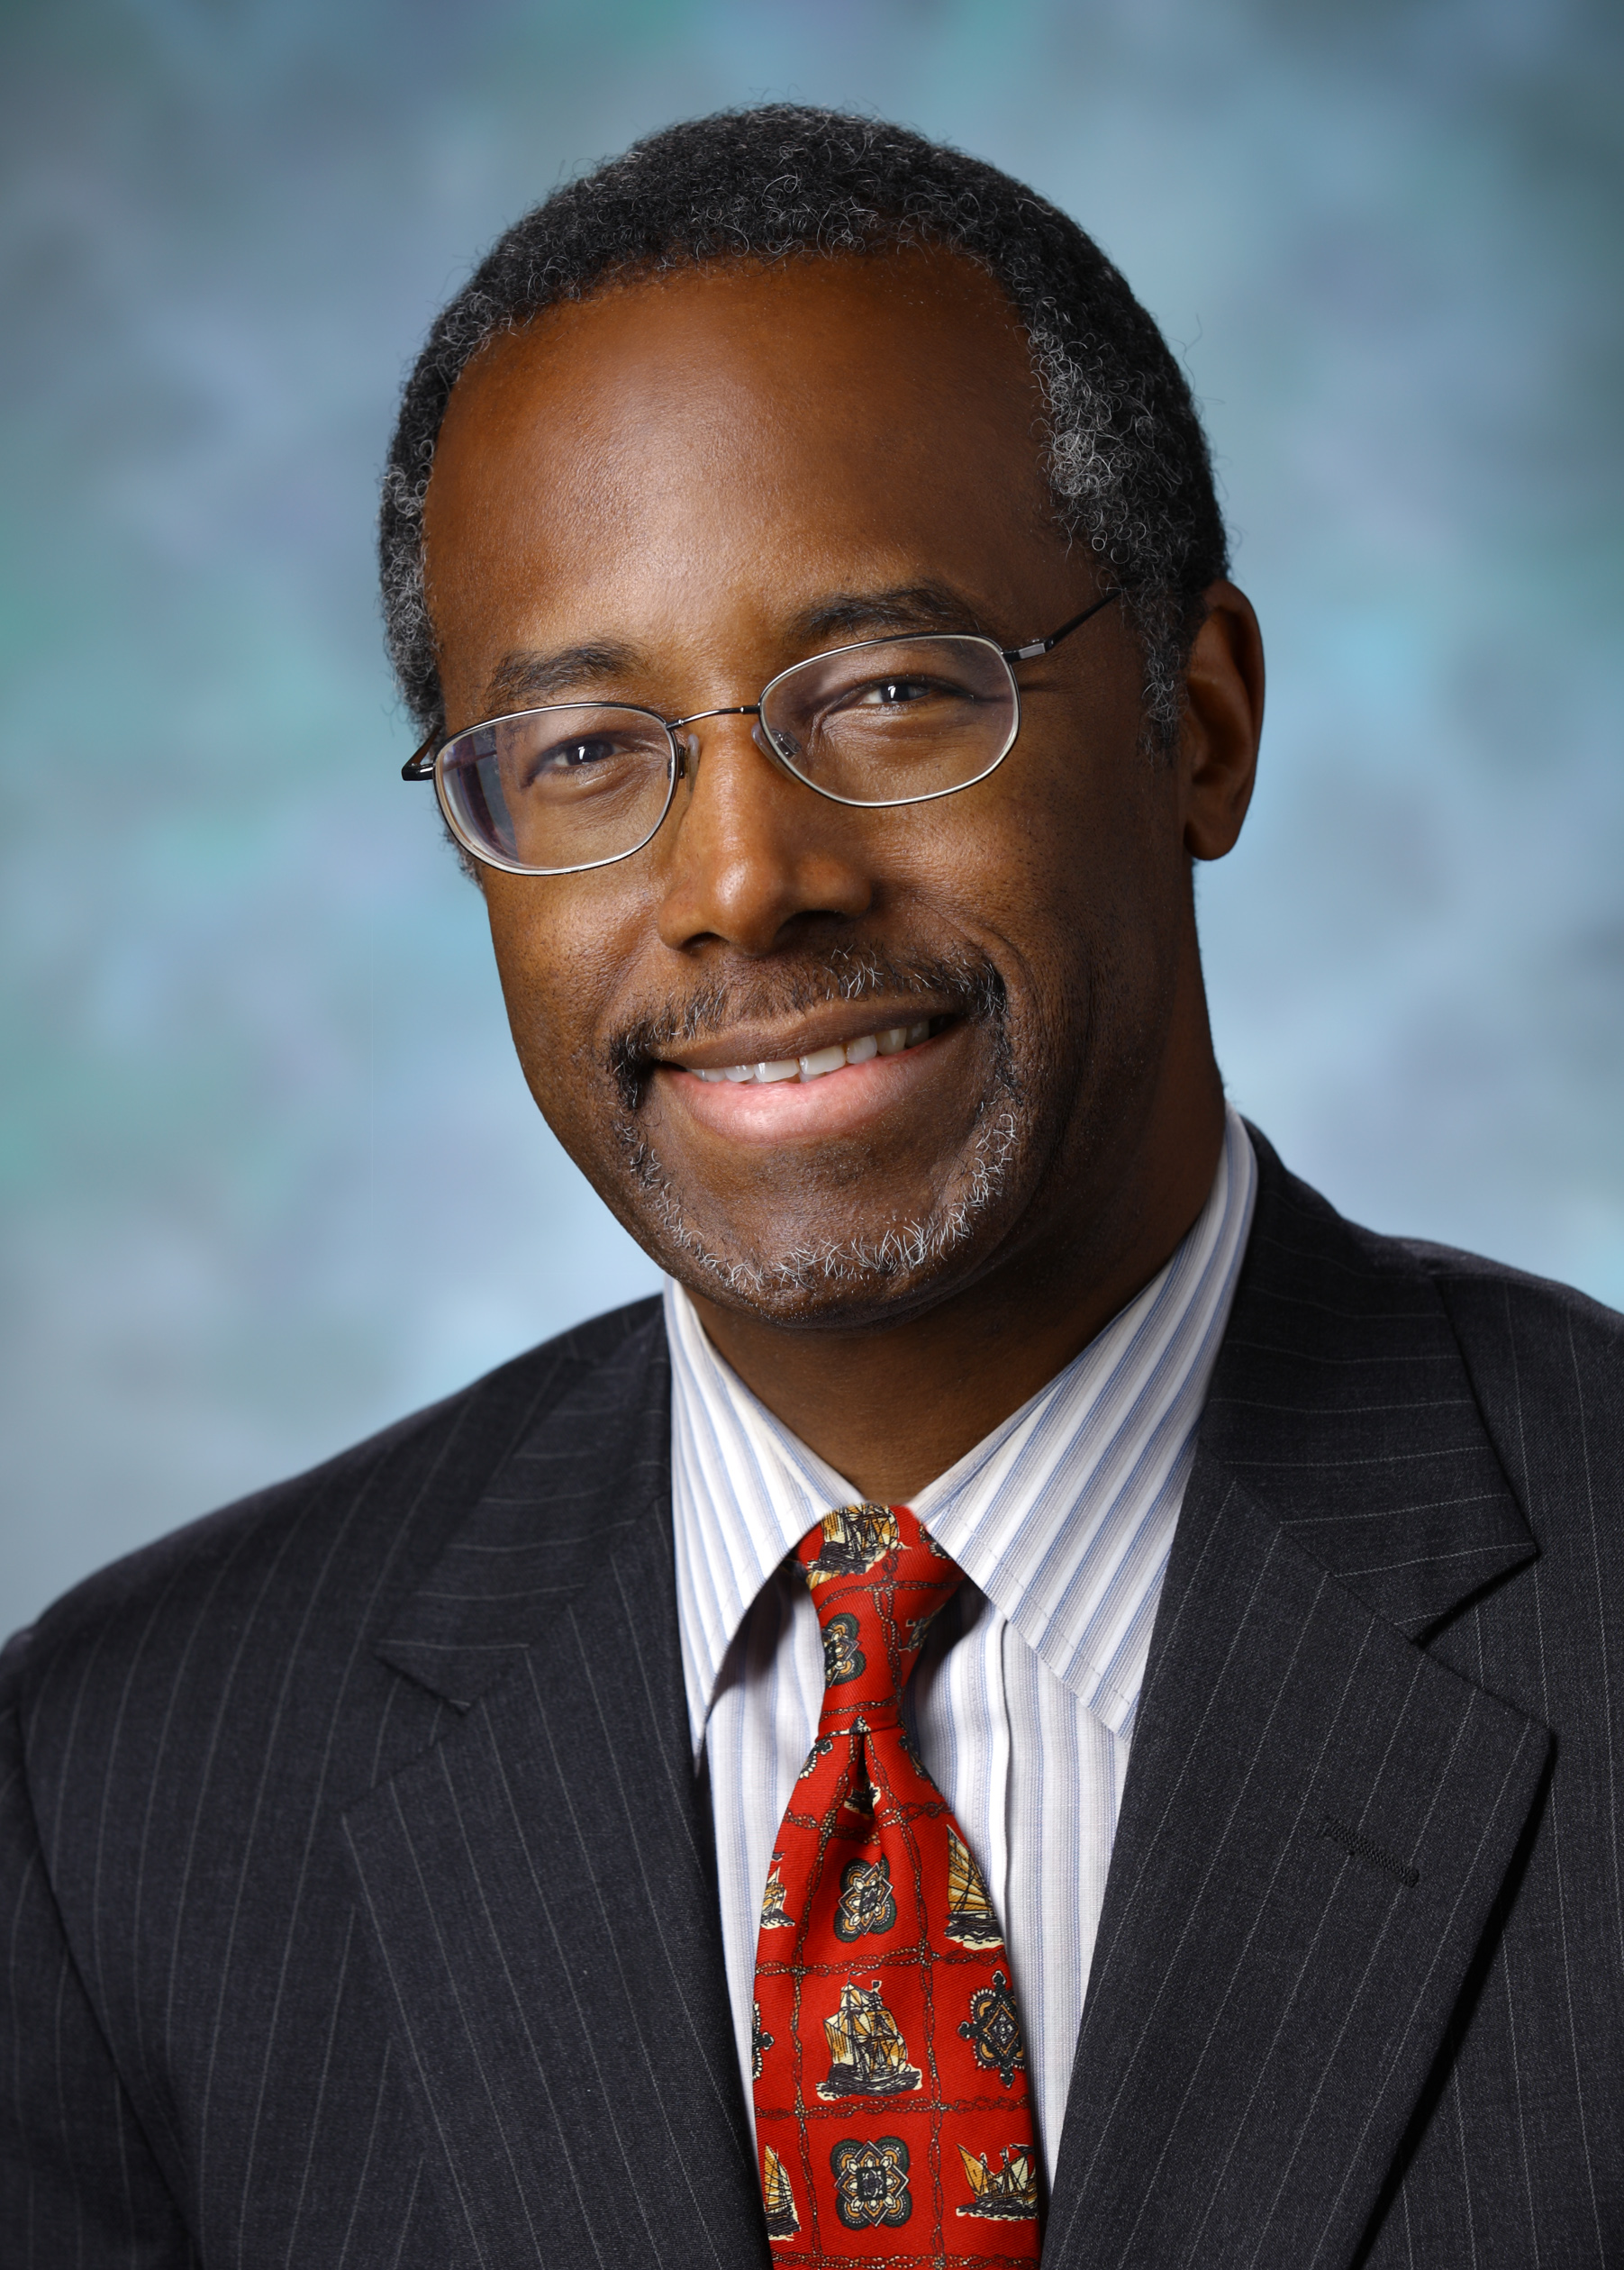 read think big by ben carson online free